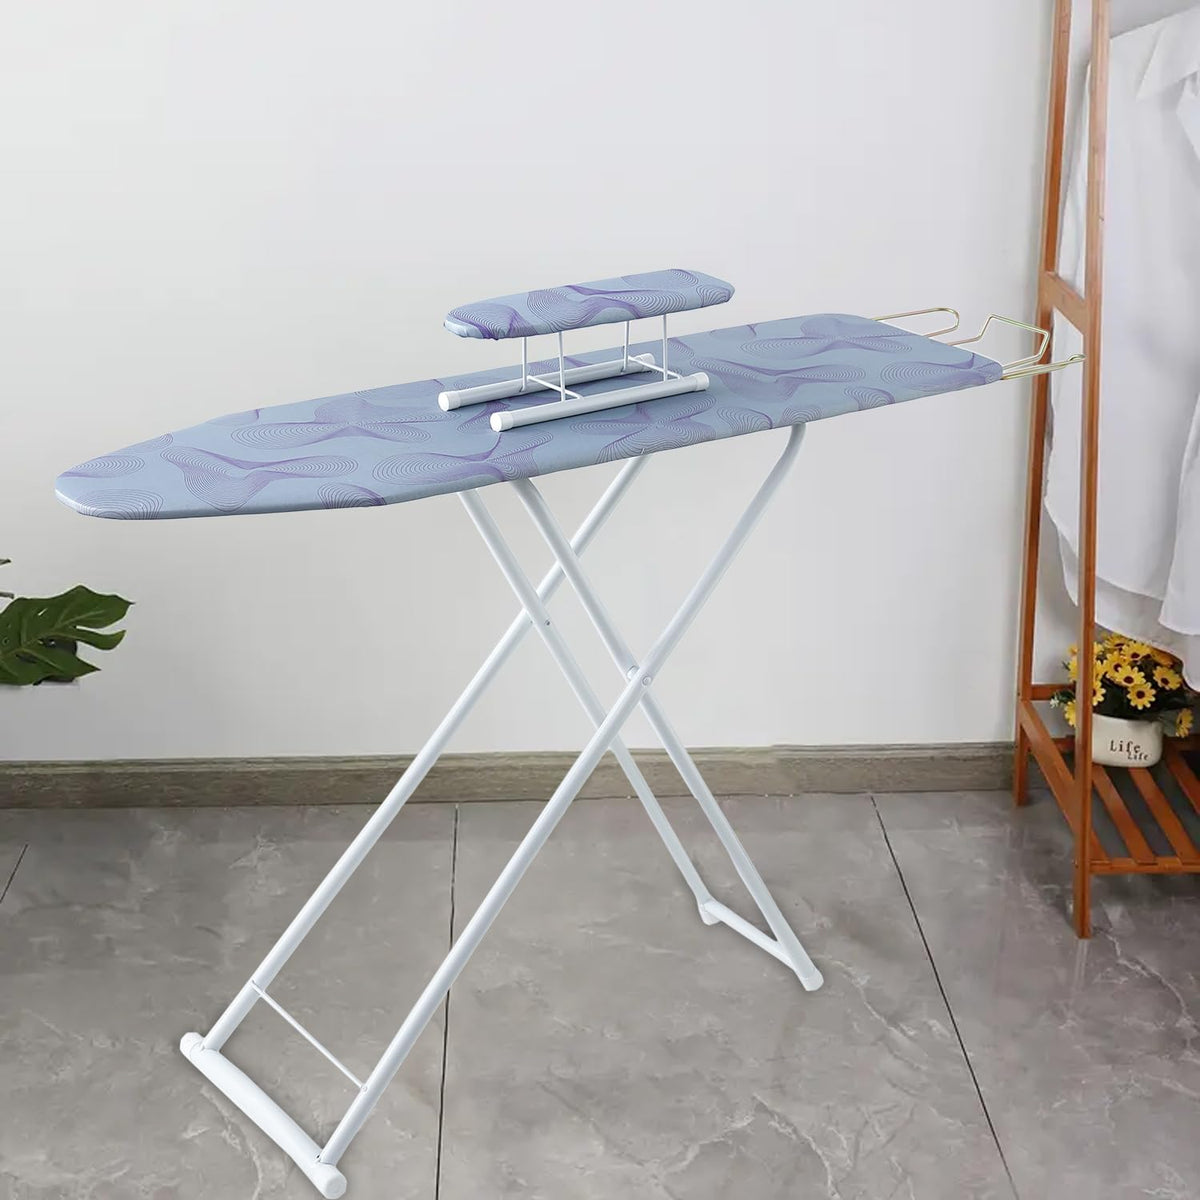 Homestic 42 Inch Ironing Board with Small Board|Ironing Stand for Clothes|Press Table for Home (Multi)